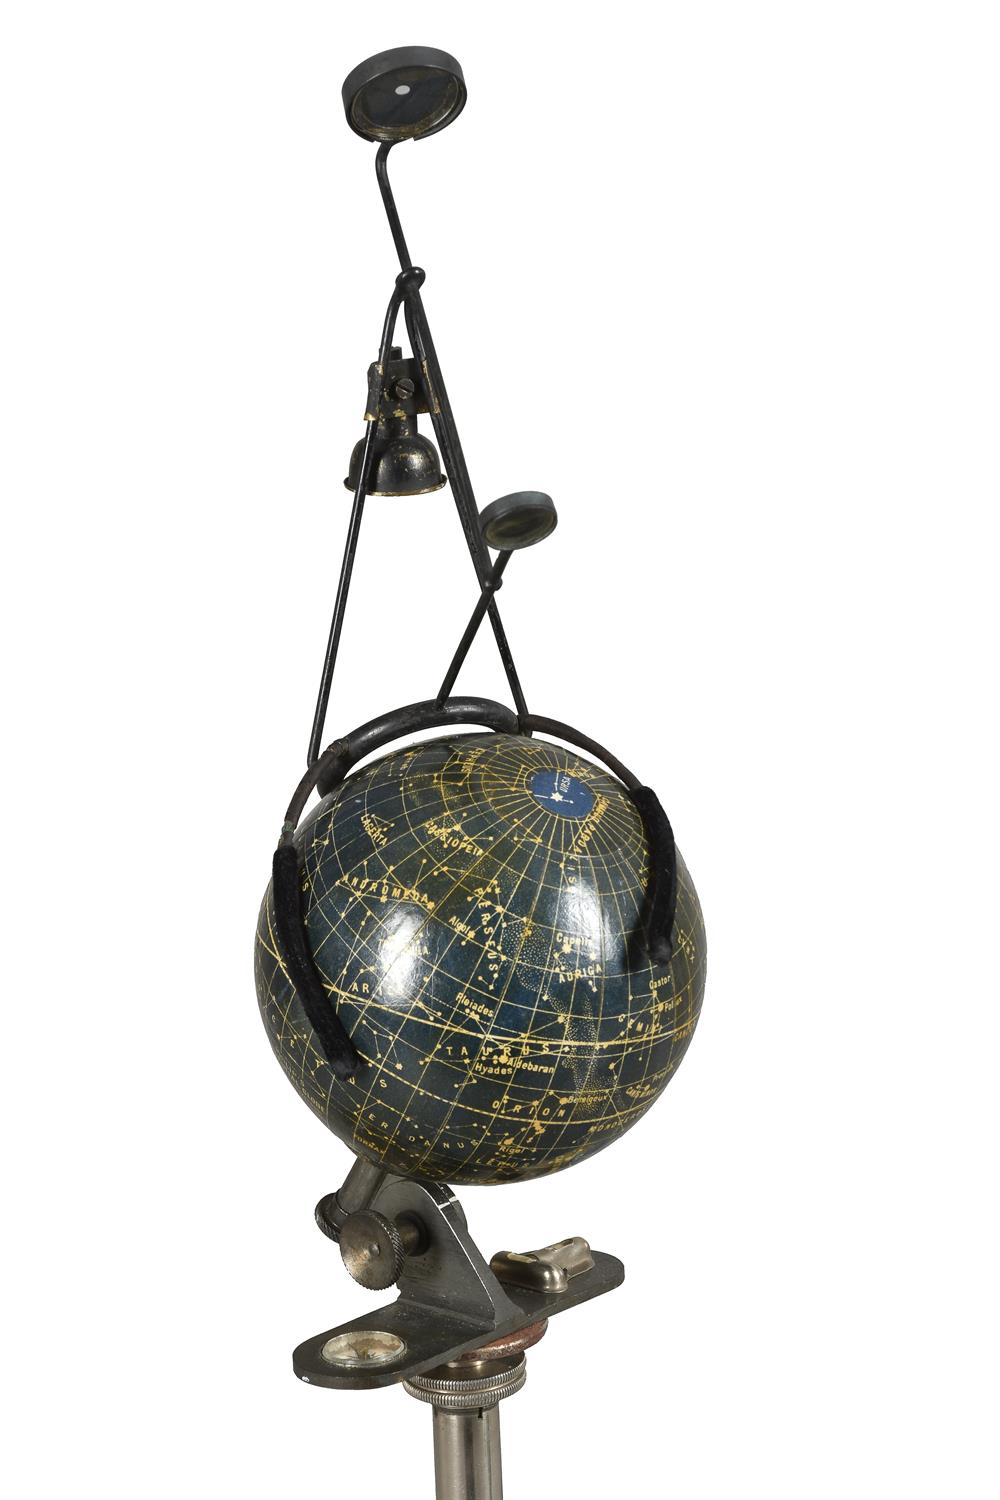 An unusual 4 inch celestial globe, C. Baker, London, early 20th century - Image 4 of 7